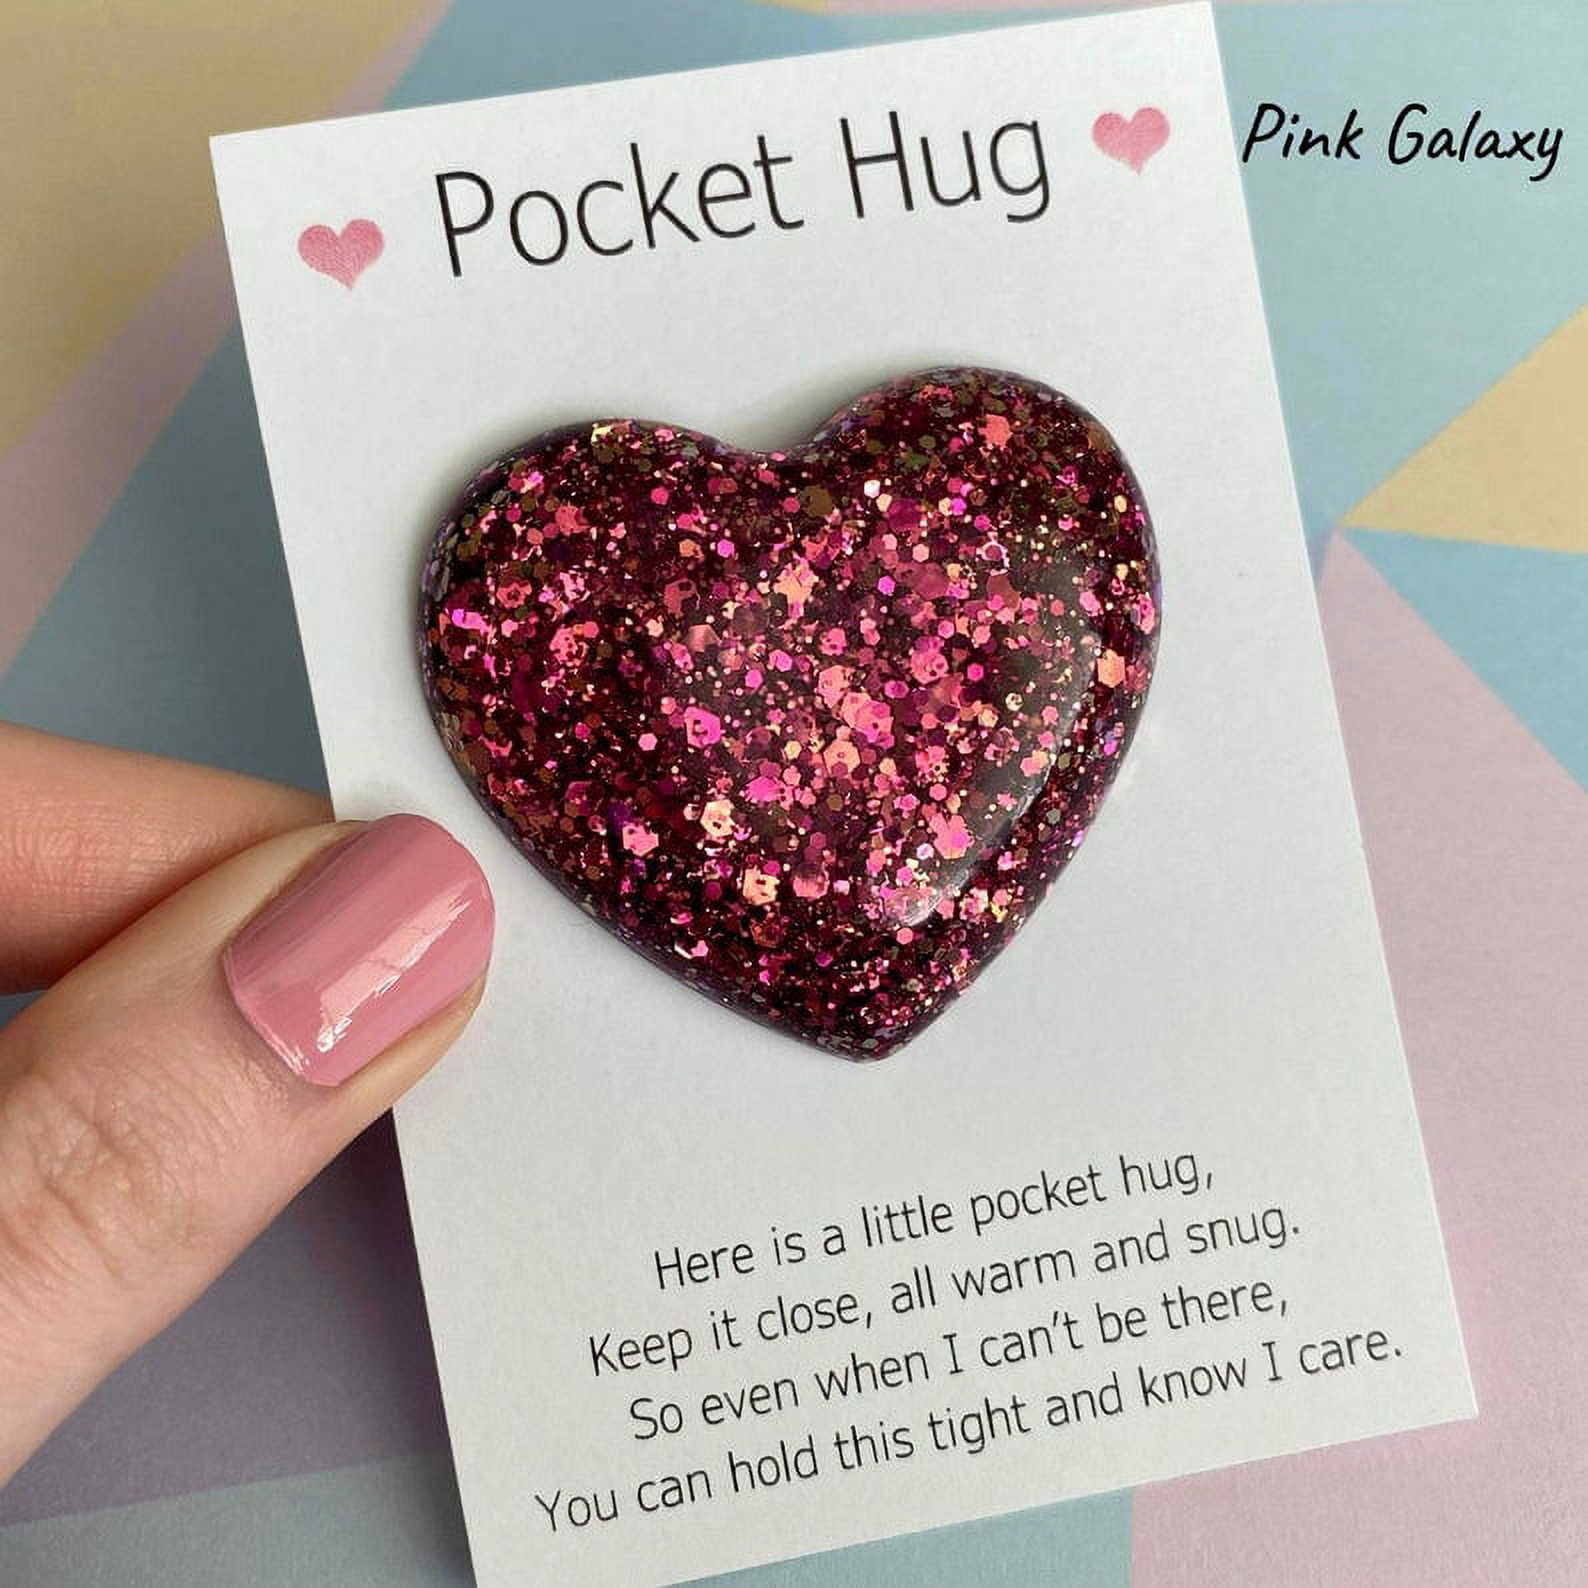 Pocket Hug Heart, Encouragement Cards, Encouragement Note Cards Heart,  Heart Shaped Glass Stones, Token Keepsake, Greeting Cards Encouragement,  Encouragement Gifts for Friends 